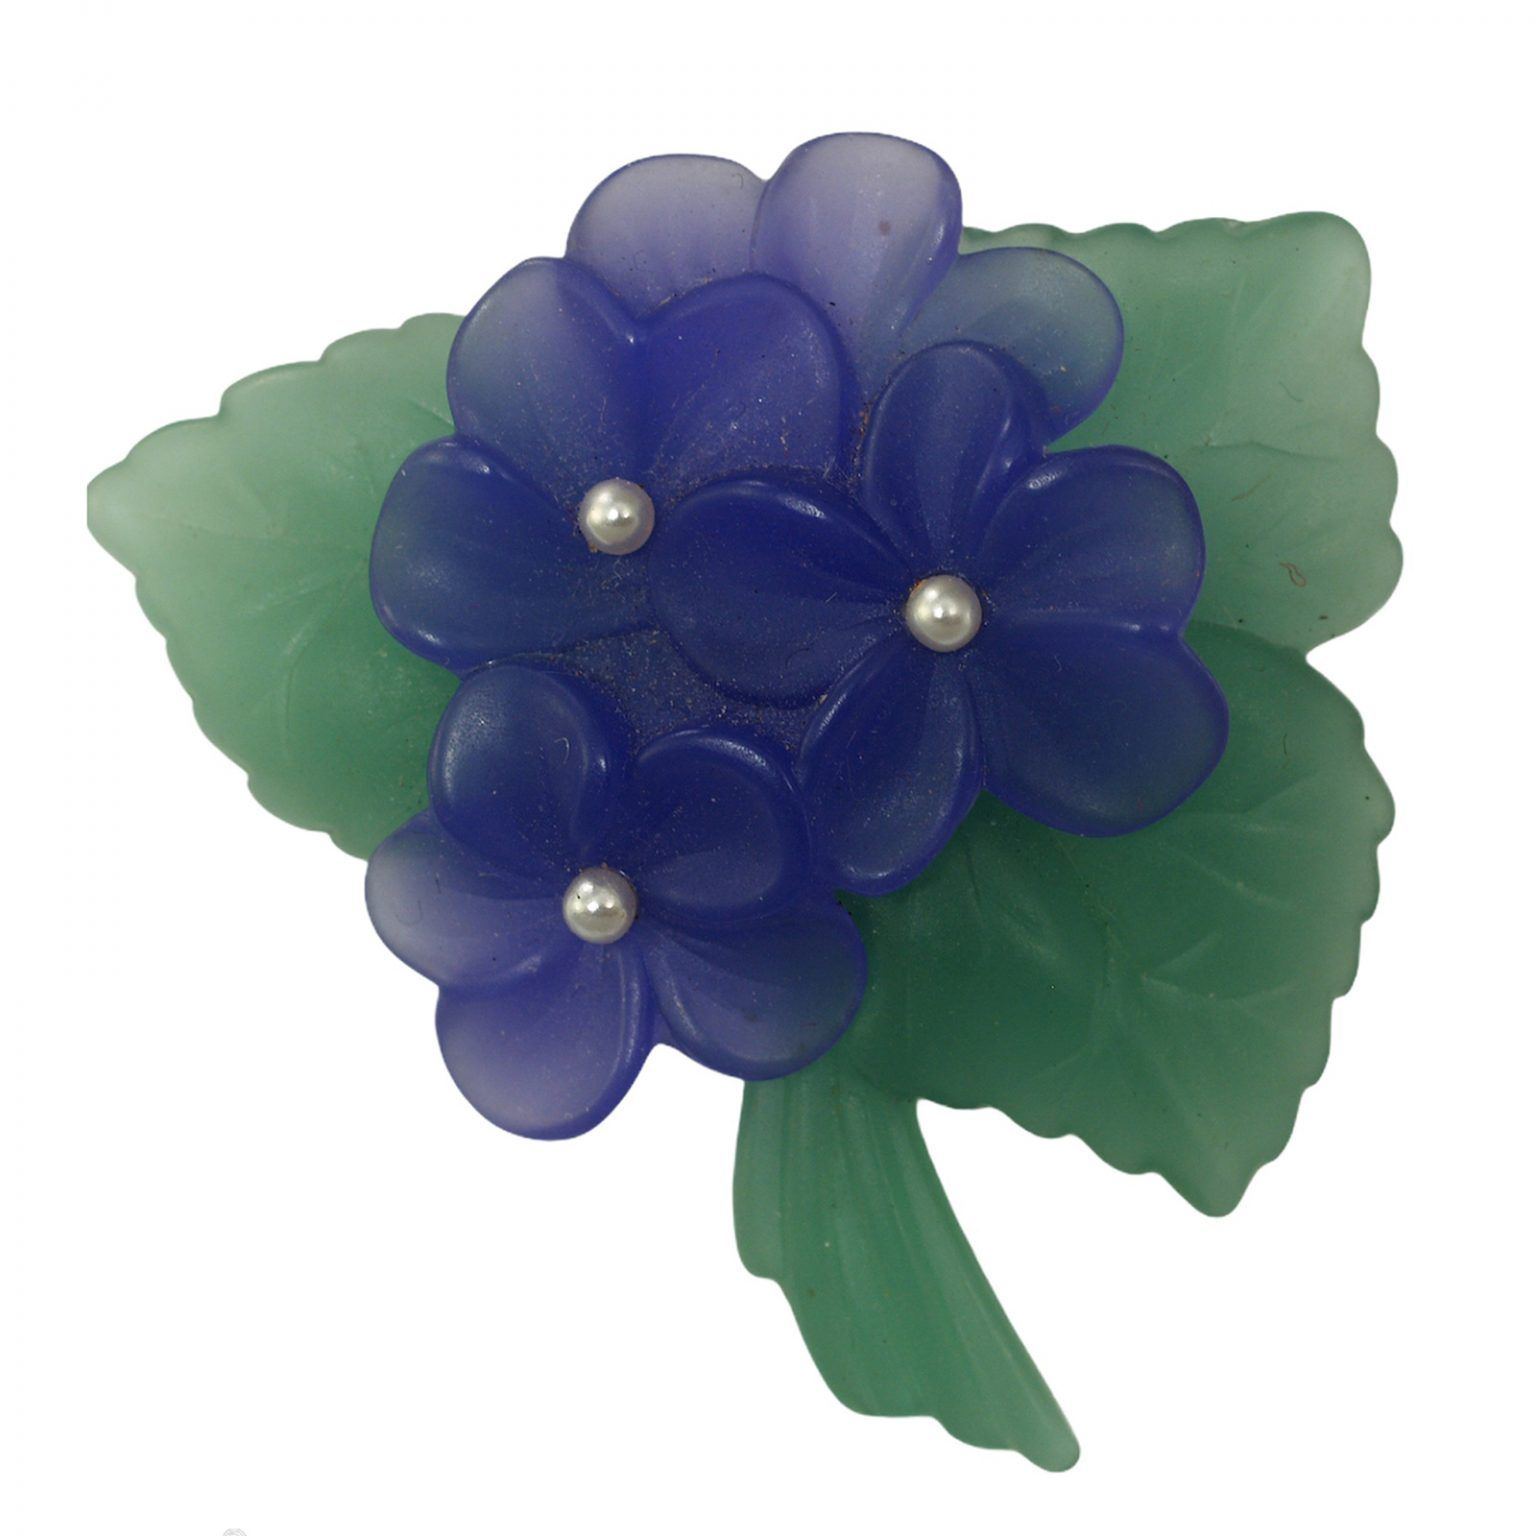 Vintage Resin Flower Pin with Faux Pearl Accents